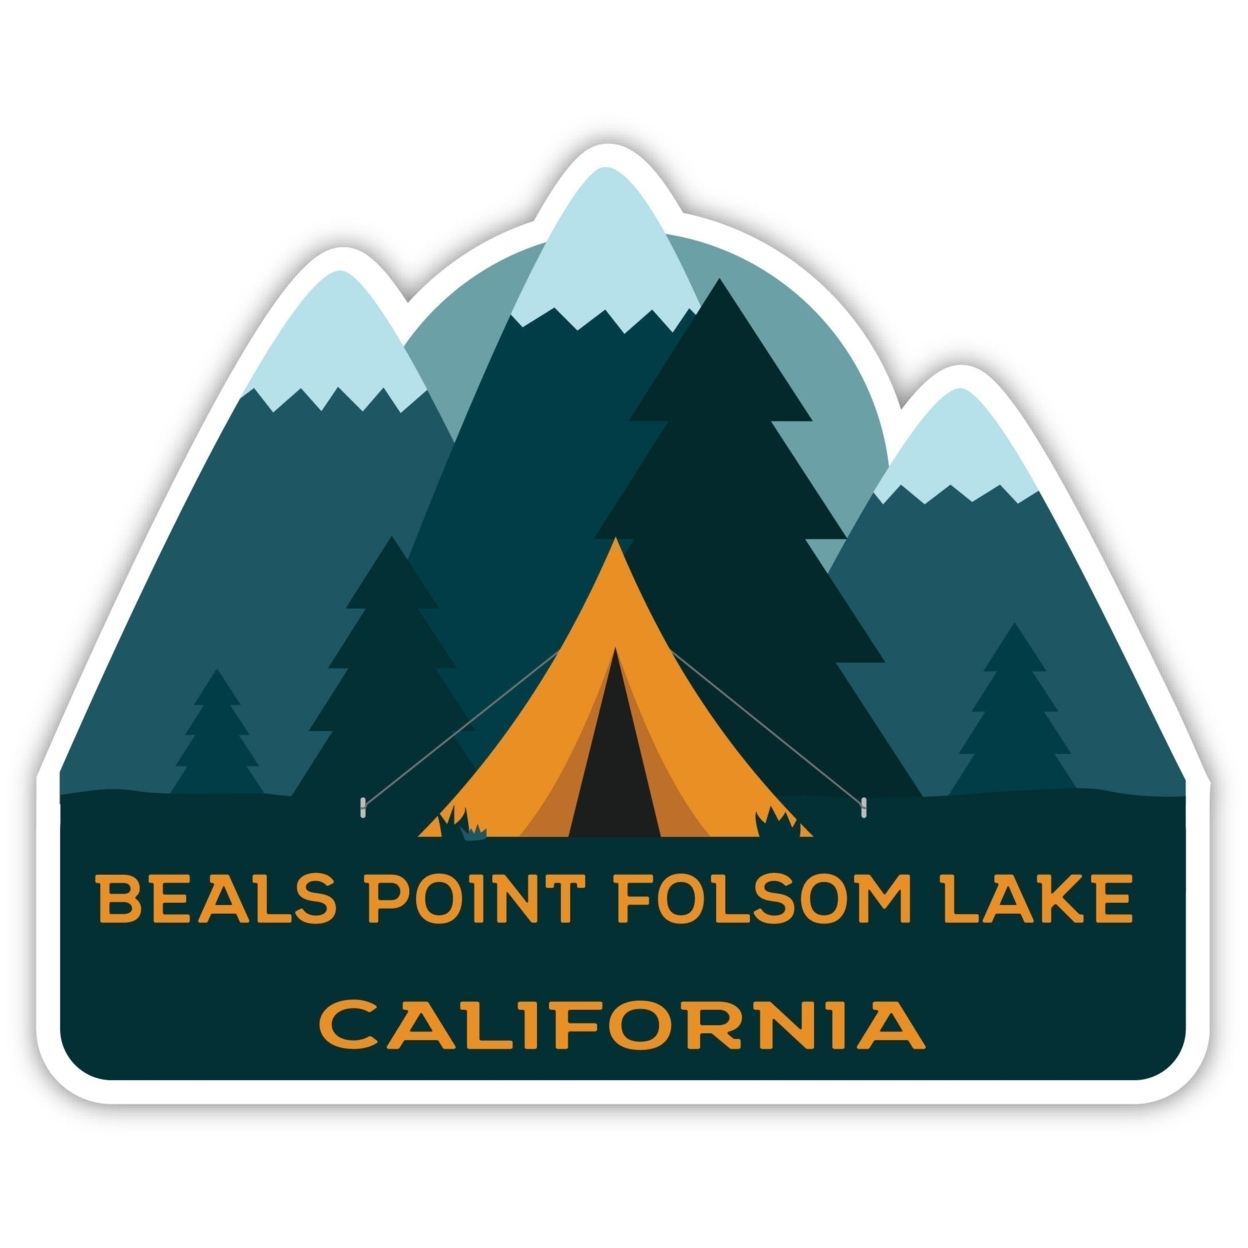 Beals Point Folsom Lake California Souvenir Decorative Stickers (Choose Theme And Size) - 4-Pack, 6-Inch, Bear